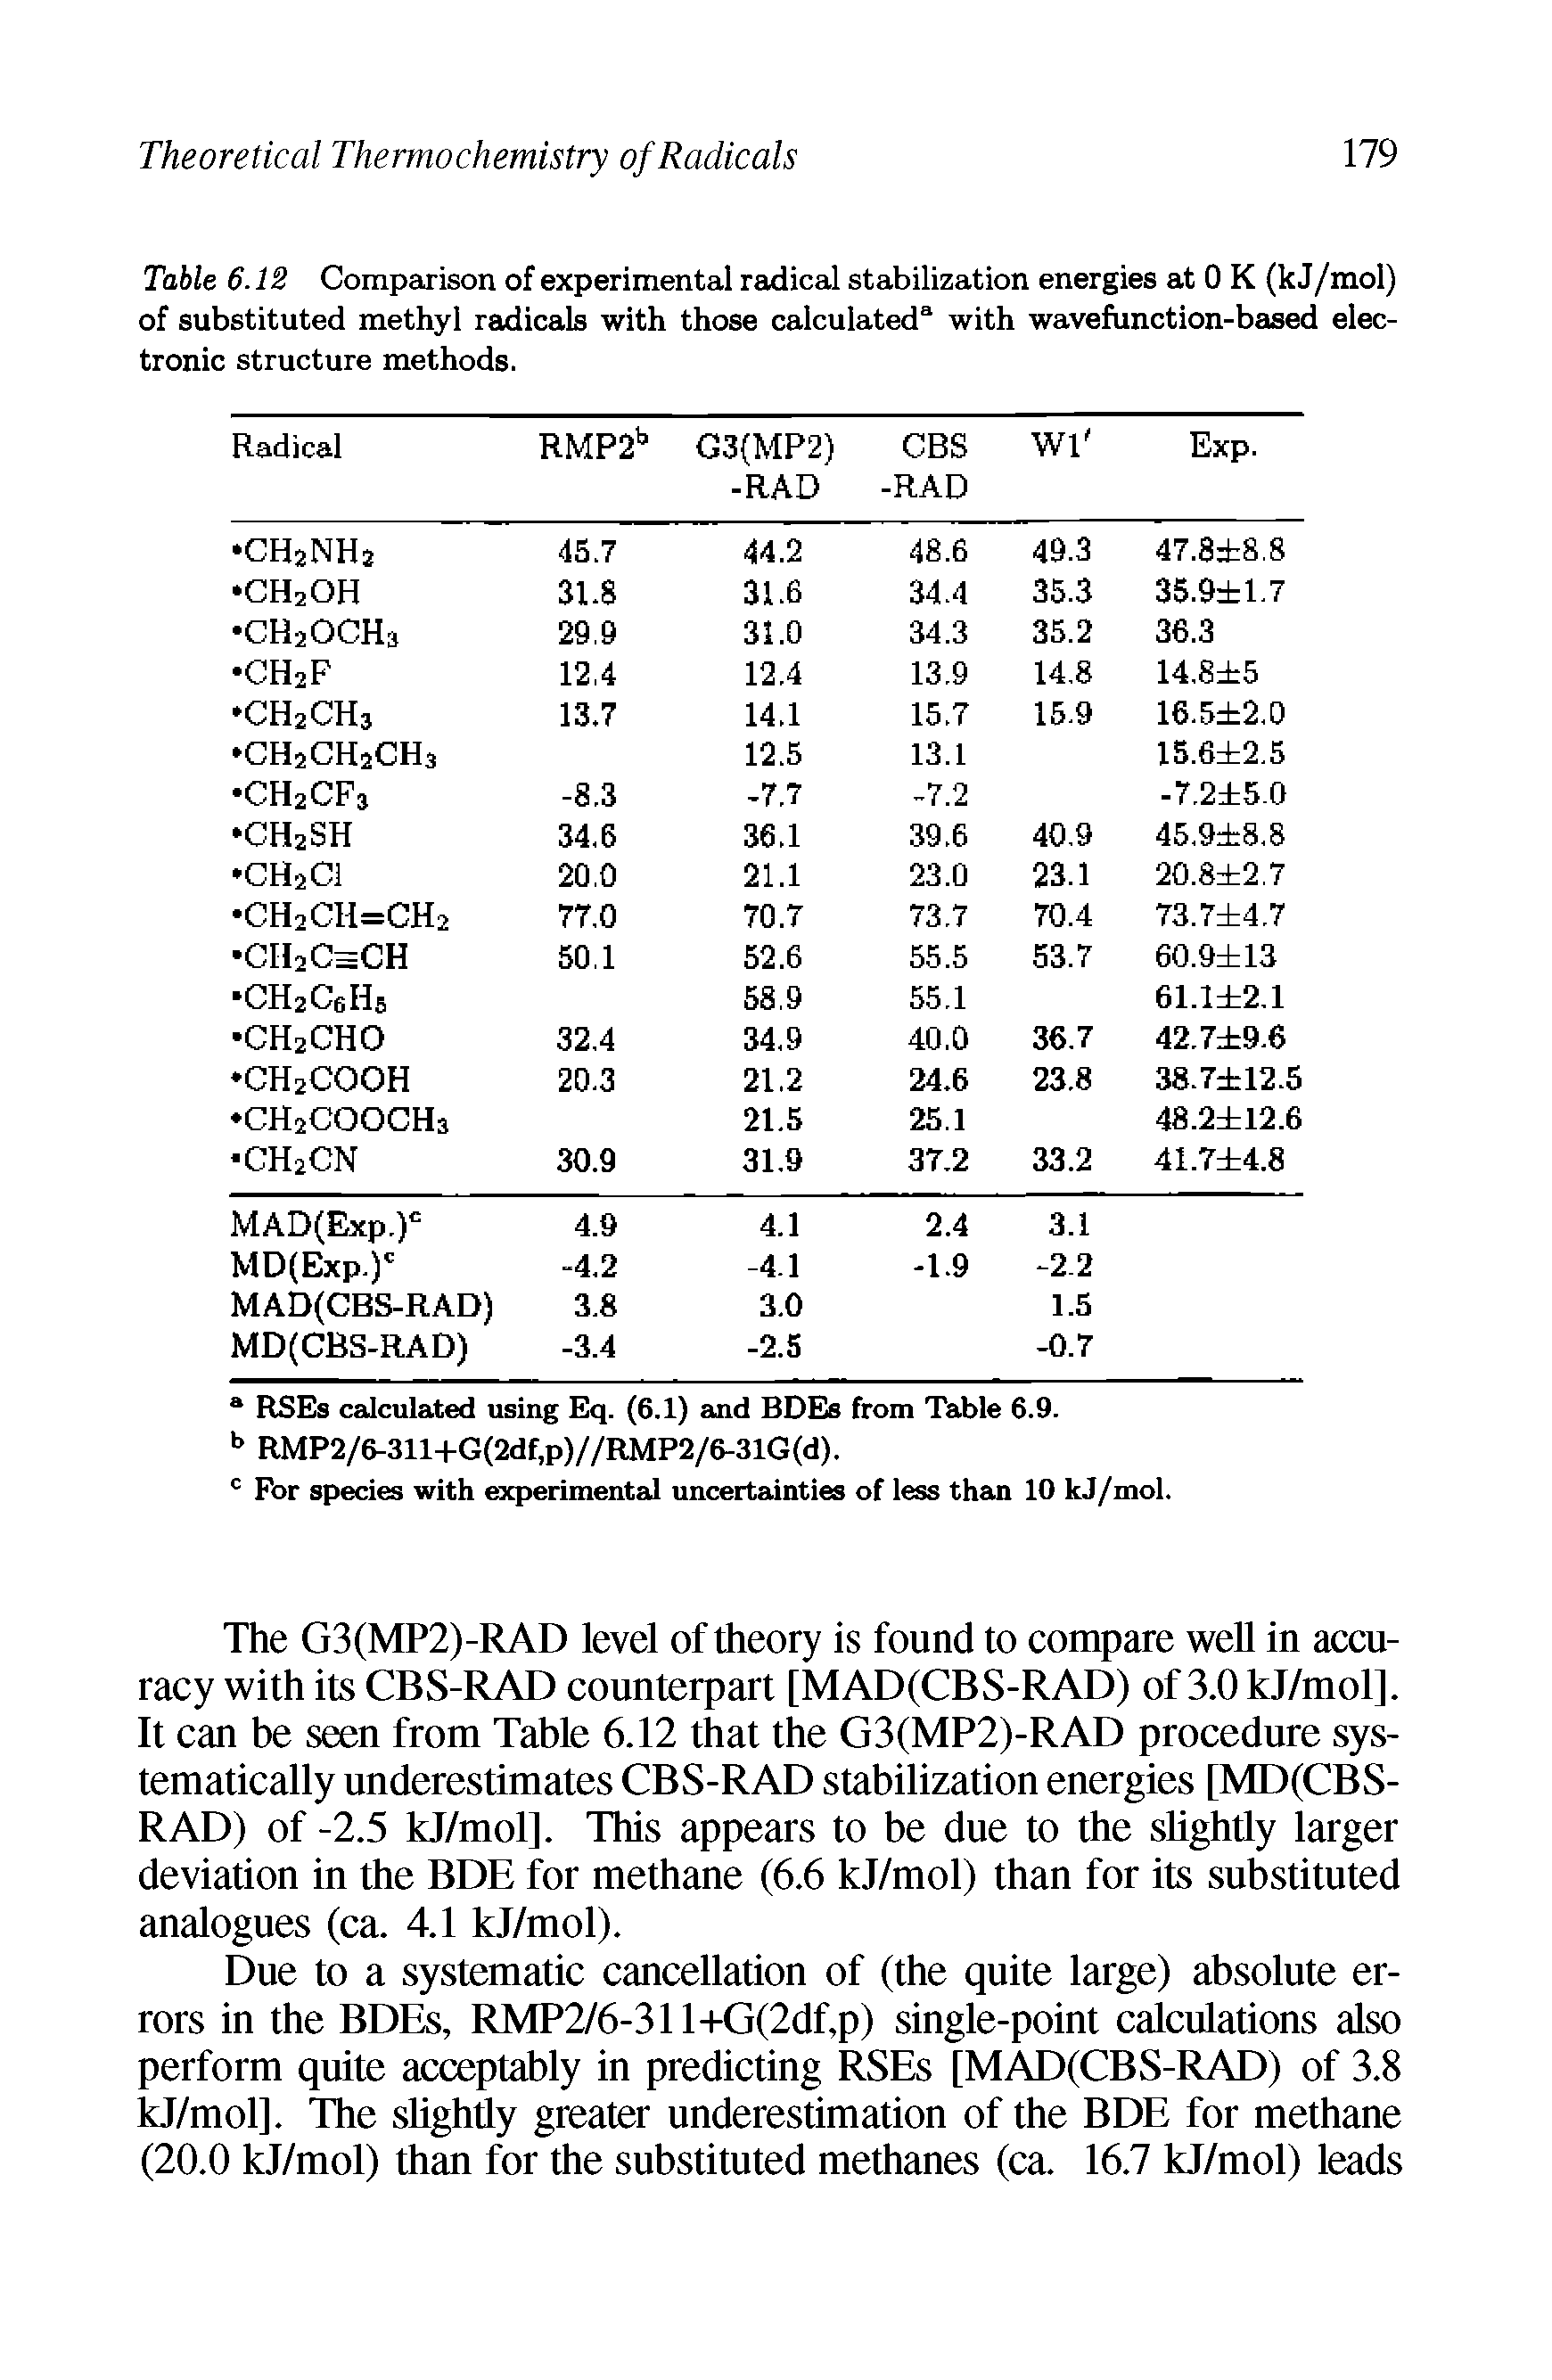 Table 6.12 Comparison of experimental radical stabilization energies at 0 K (kJ/mol) of substituted methyl radicals with those calculated3 with wavefunction-based electronic structure methods.